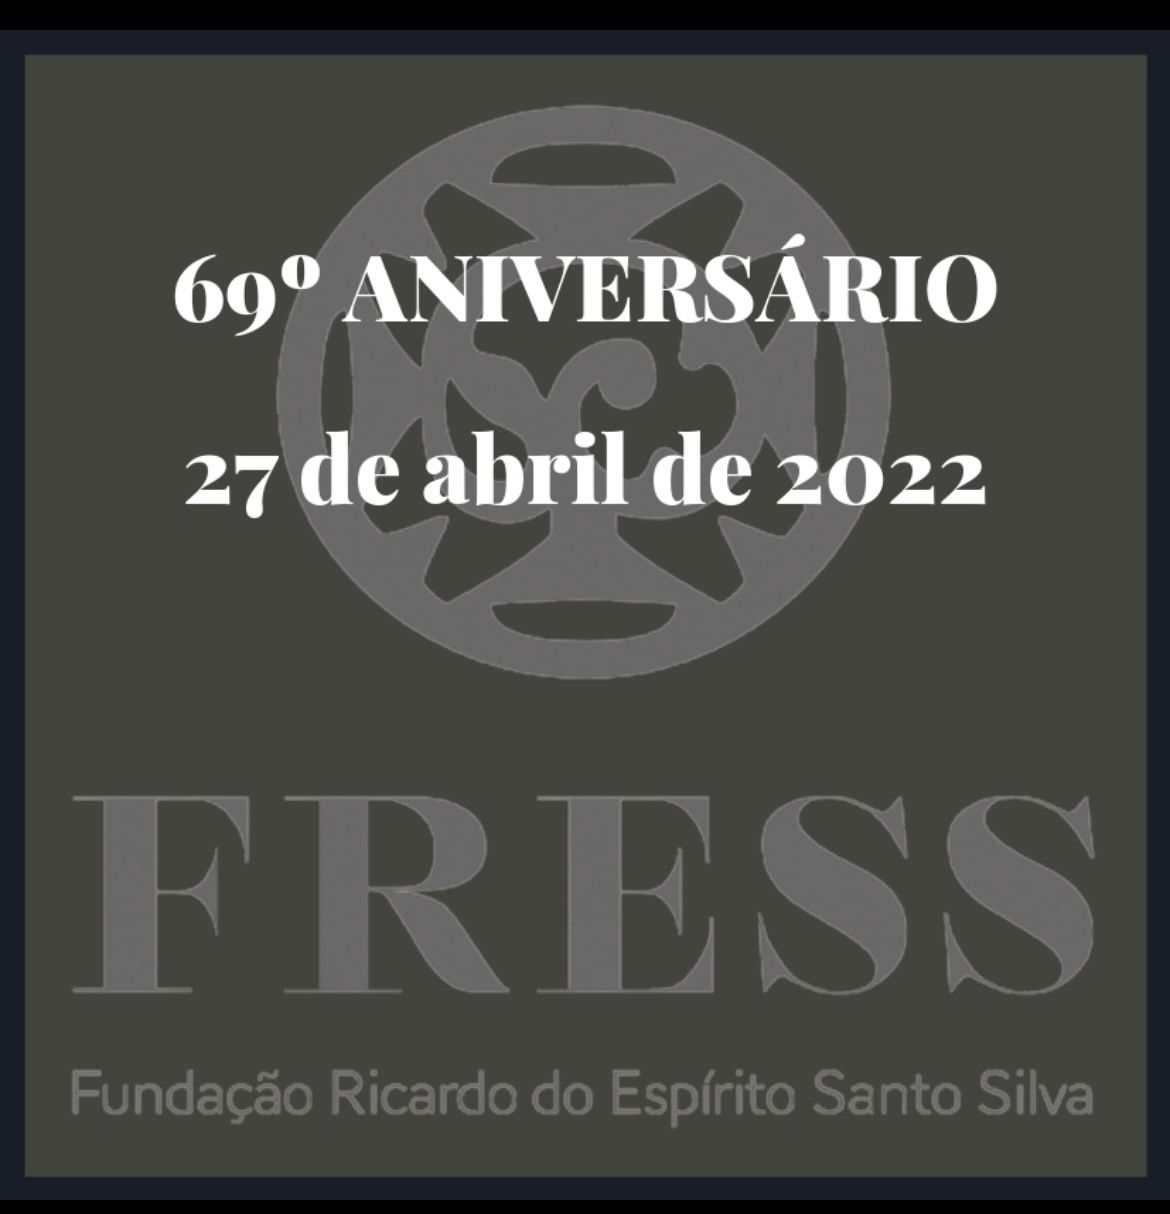 Next 27th April Fress will celebrate 69 years!